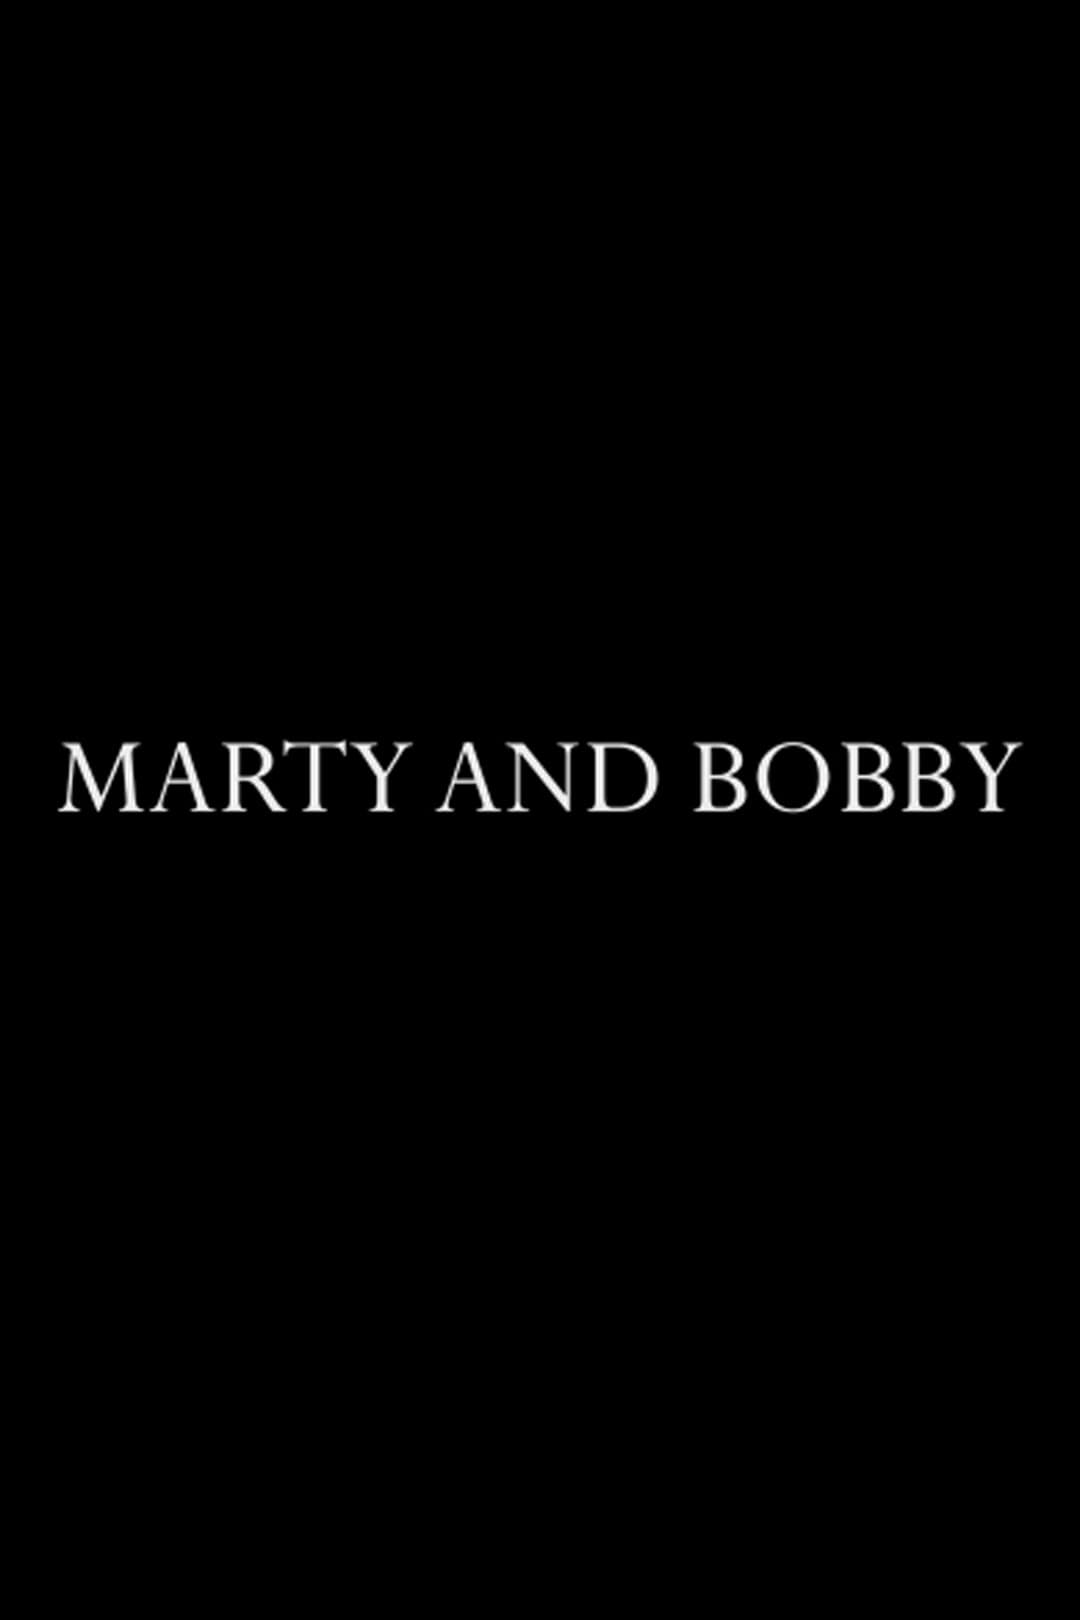 Marty and Bobby